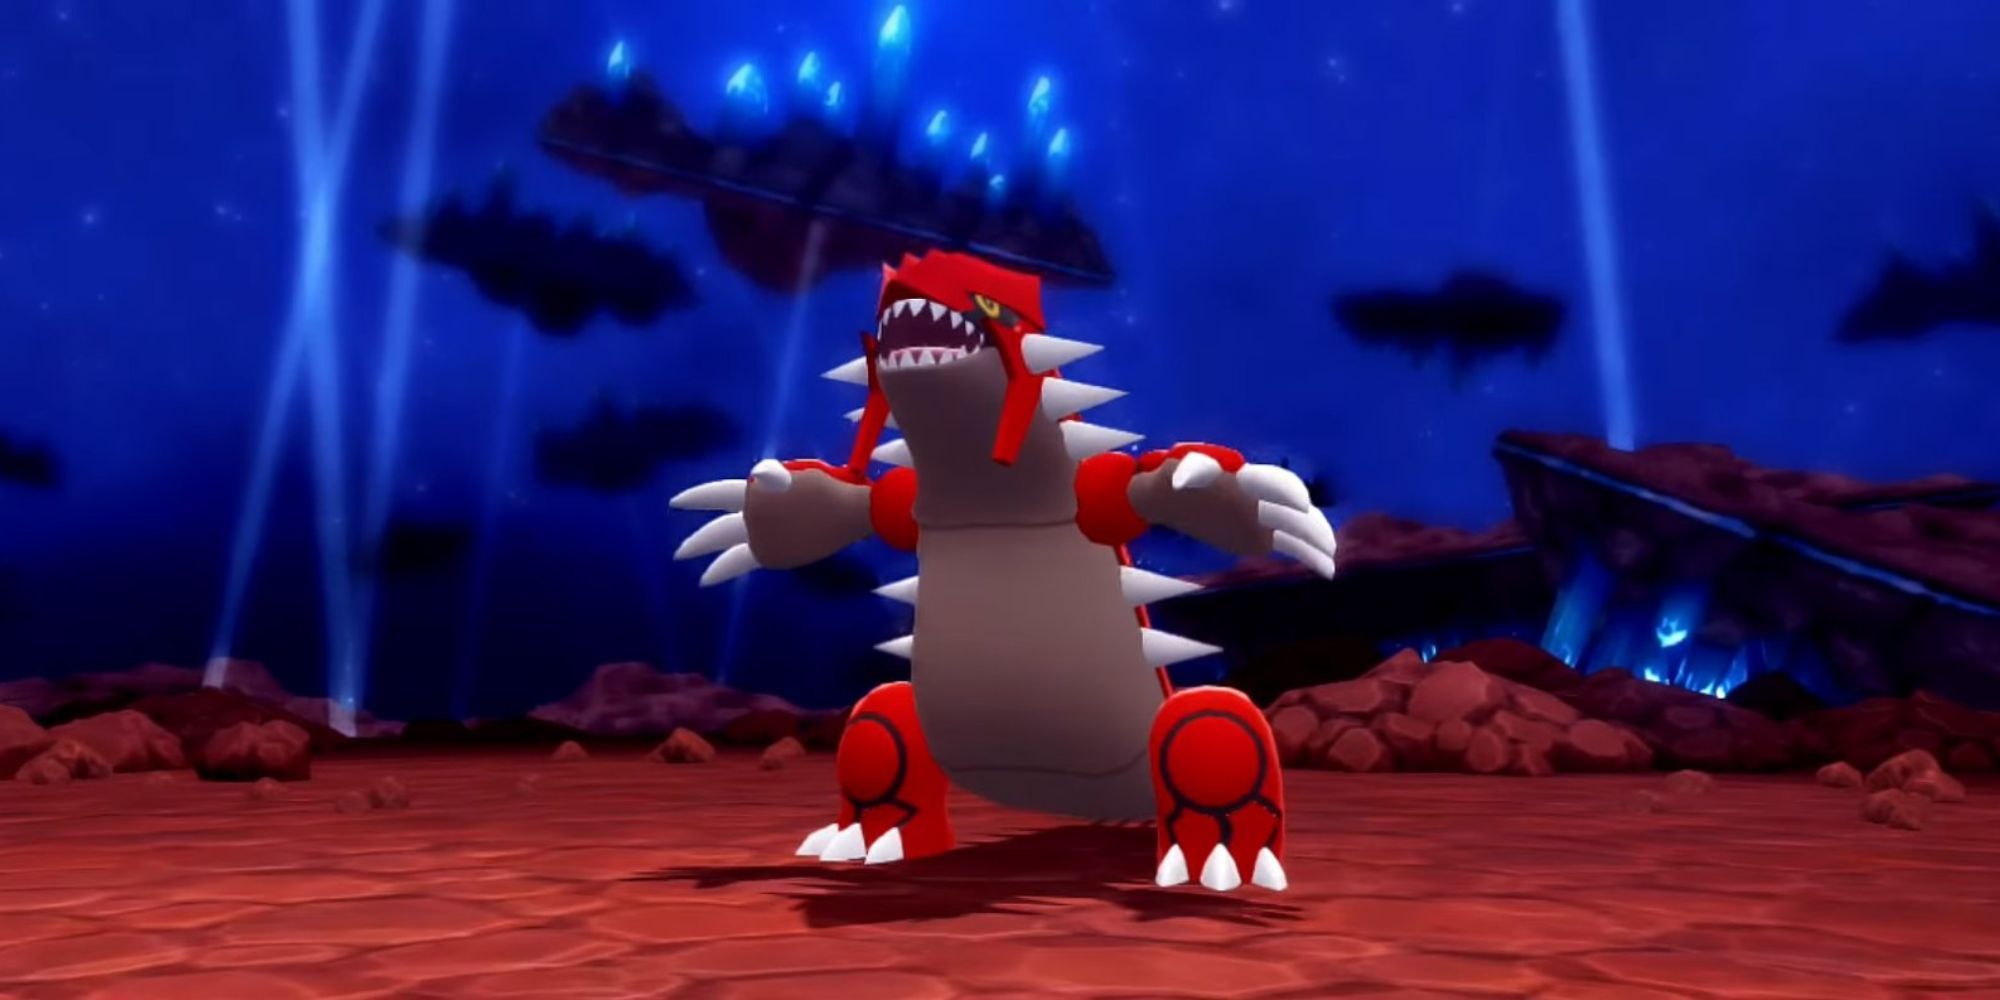 Groudon roaring at the commencement of battle